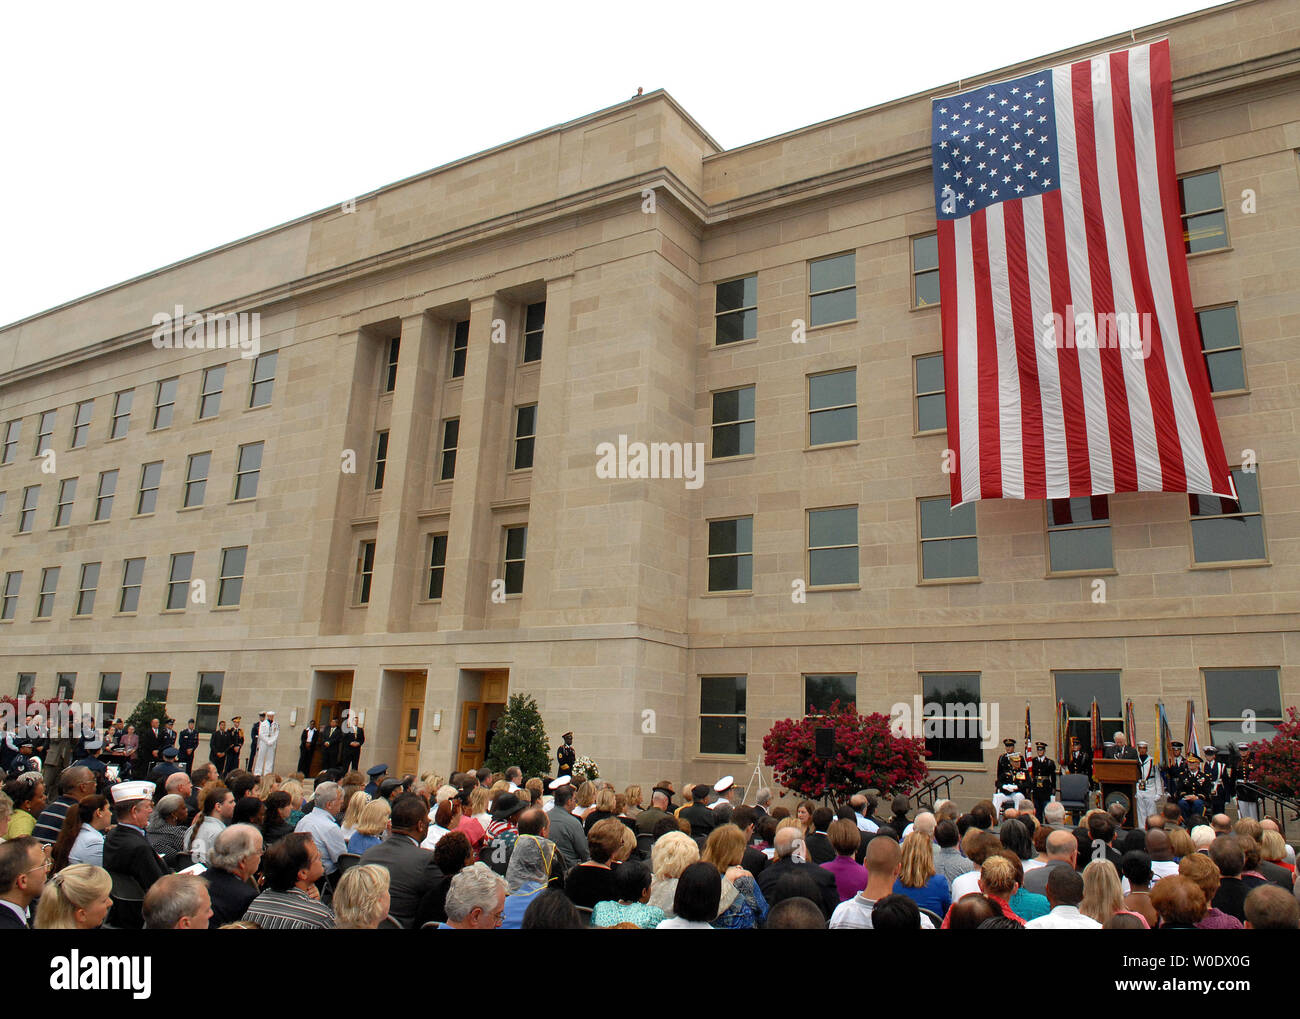 Members of the military and civilians participate in the Pentagon's September 11th Wreath Laying Observance in Arlington, Virginia, on September 11, 2007.  (UPI Photo/Roger L. Wollenberg) Stock Photo